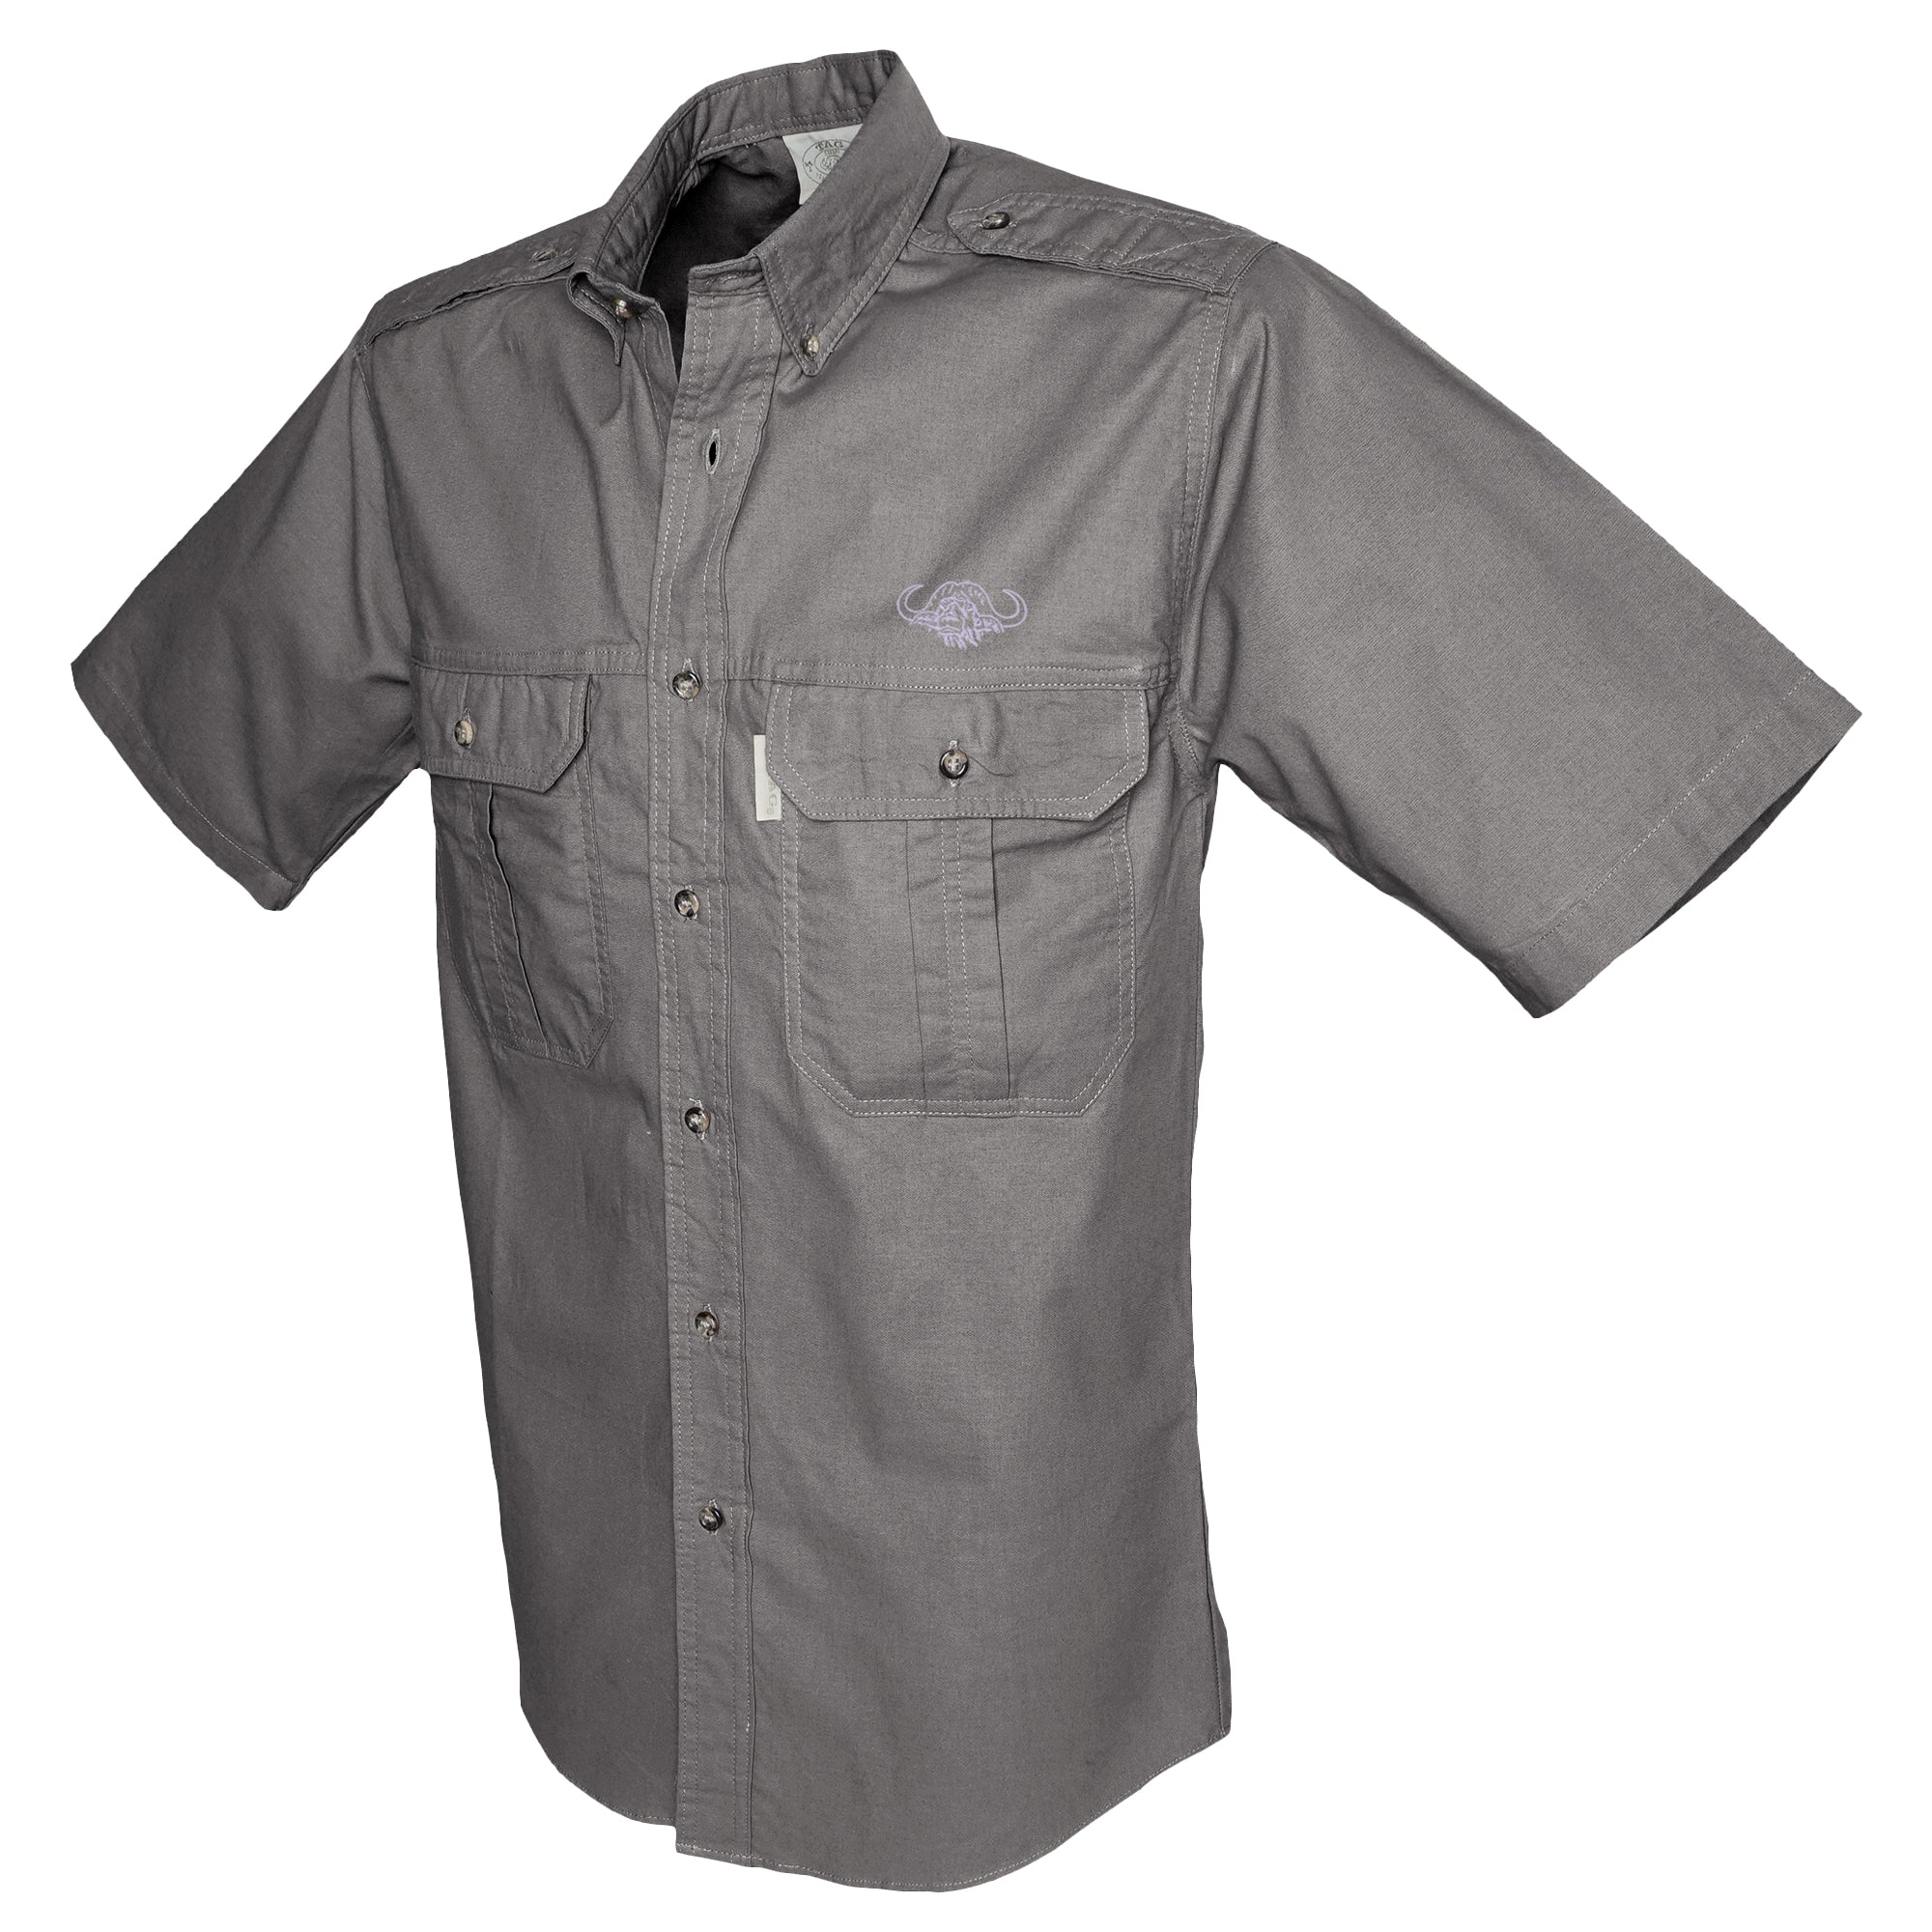 Trail Shirt for Men with Embroidered Buffalo Logo - S/Sleeve